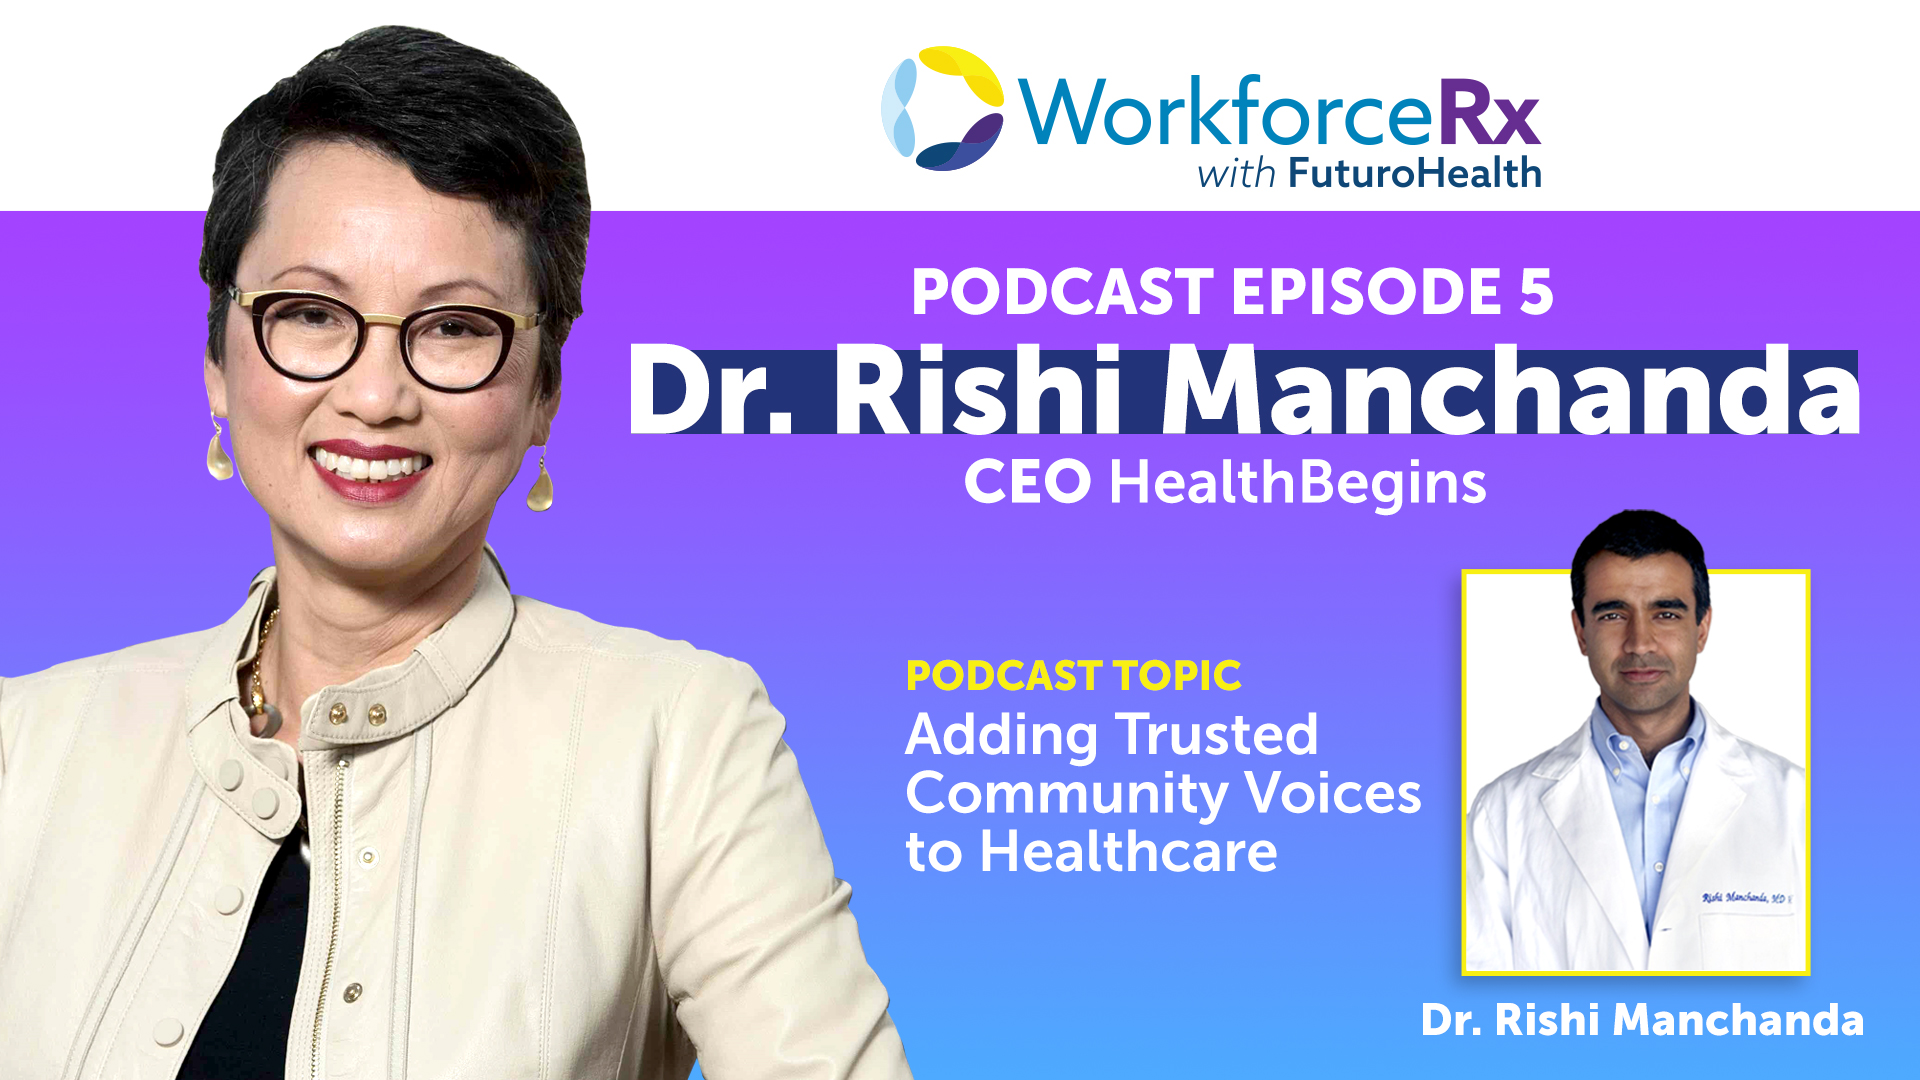 Dr. Rishi Manchanda, CEO of HealthBegins: Adding Trusted Community Voices to Healthcare